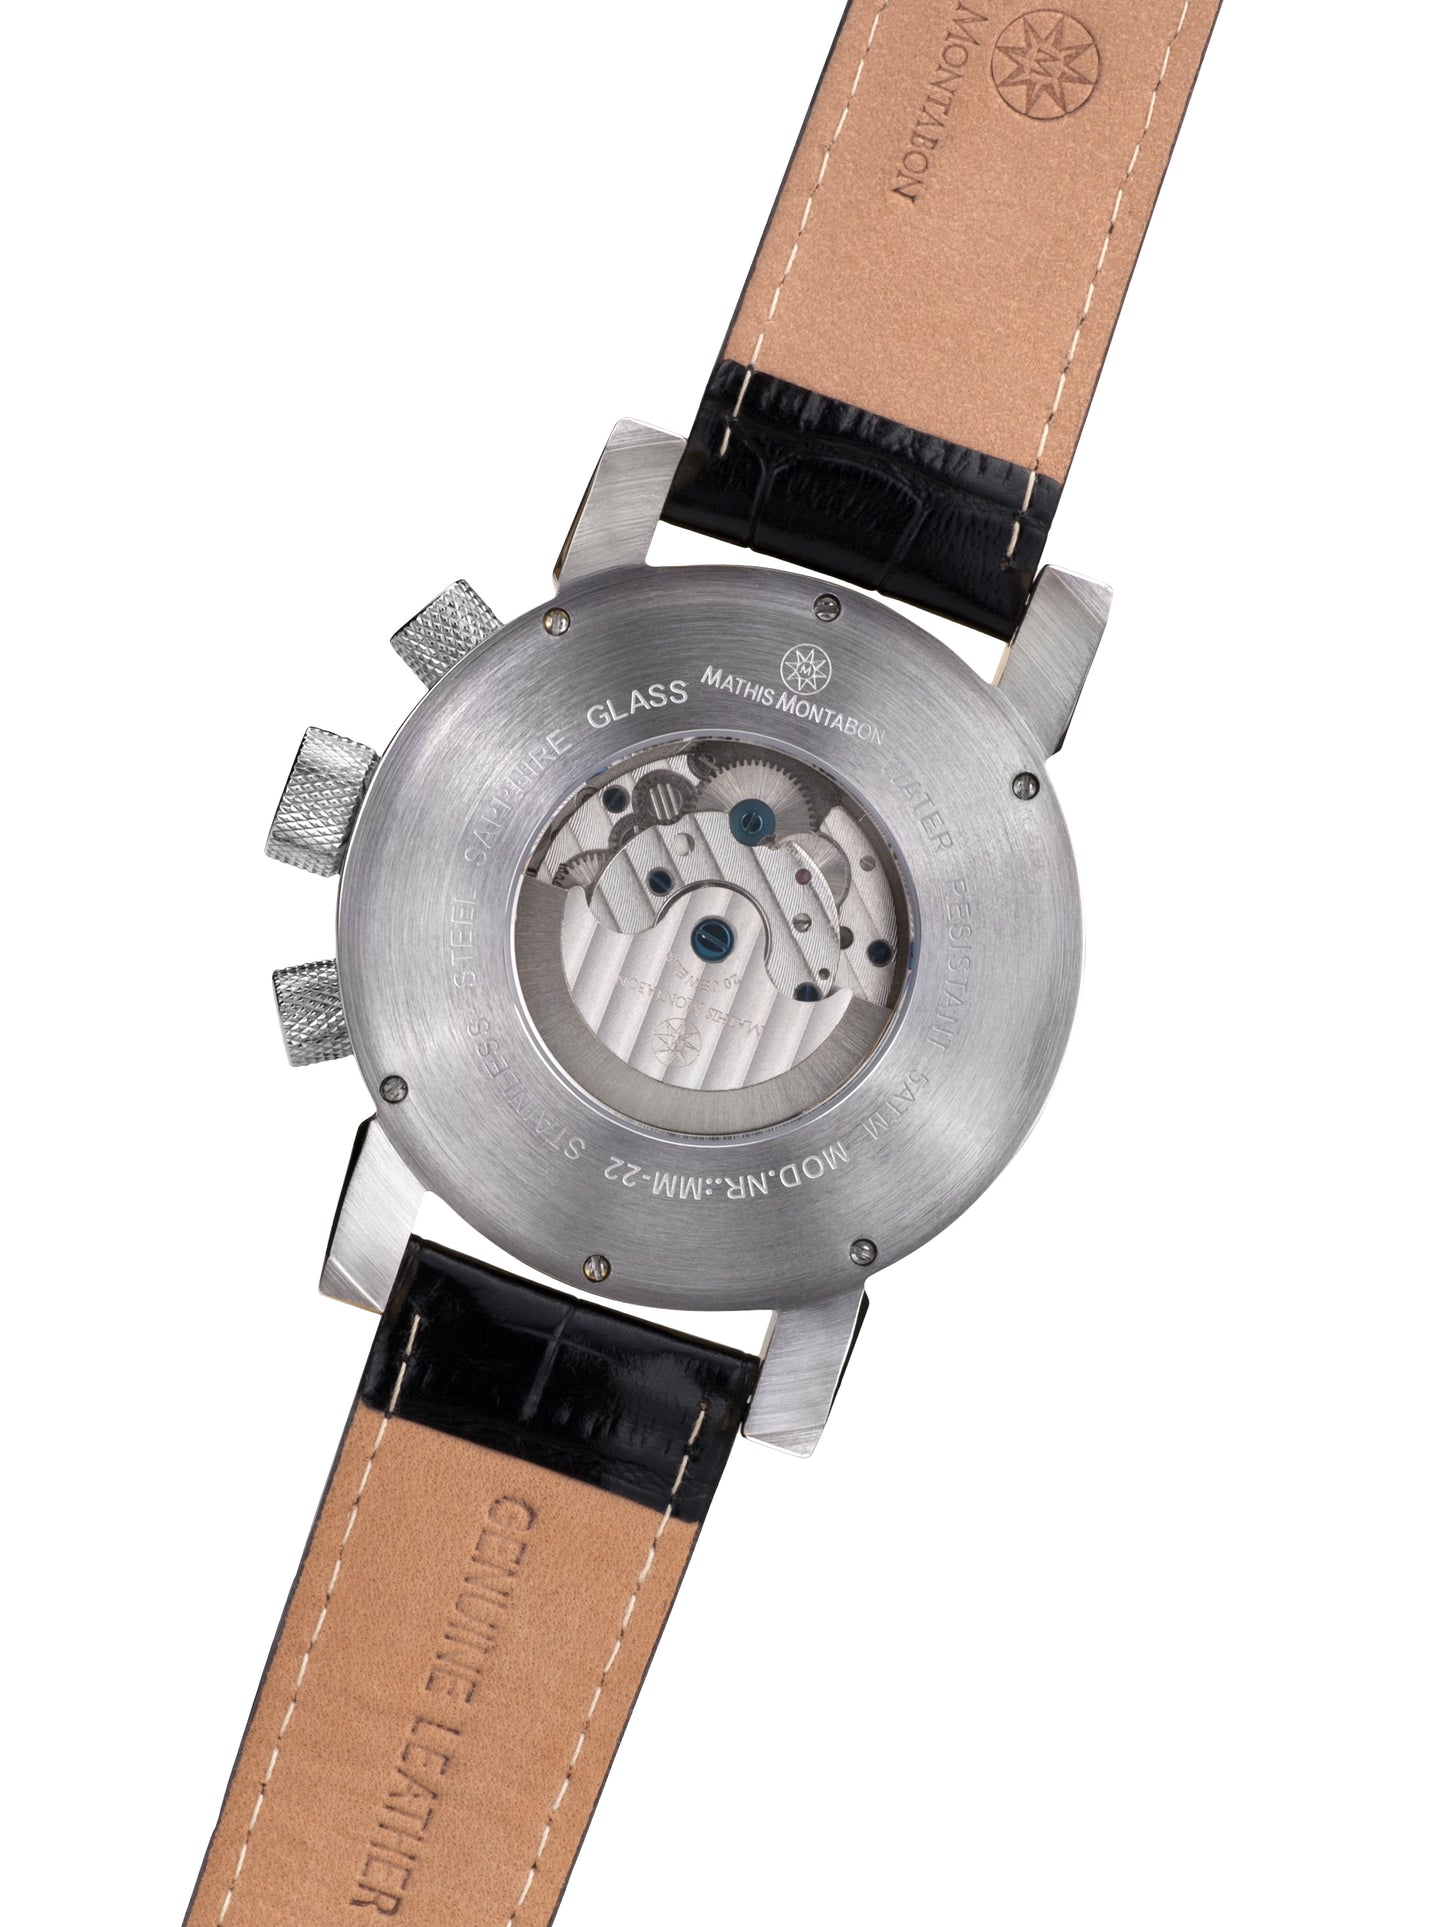 Automatic watches — La Grande — Mathis Montabon — silber